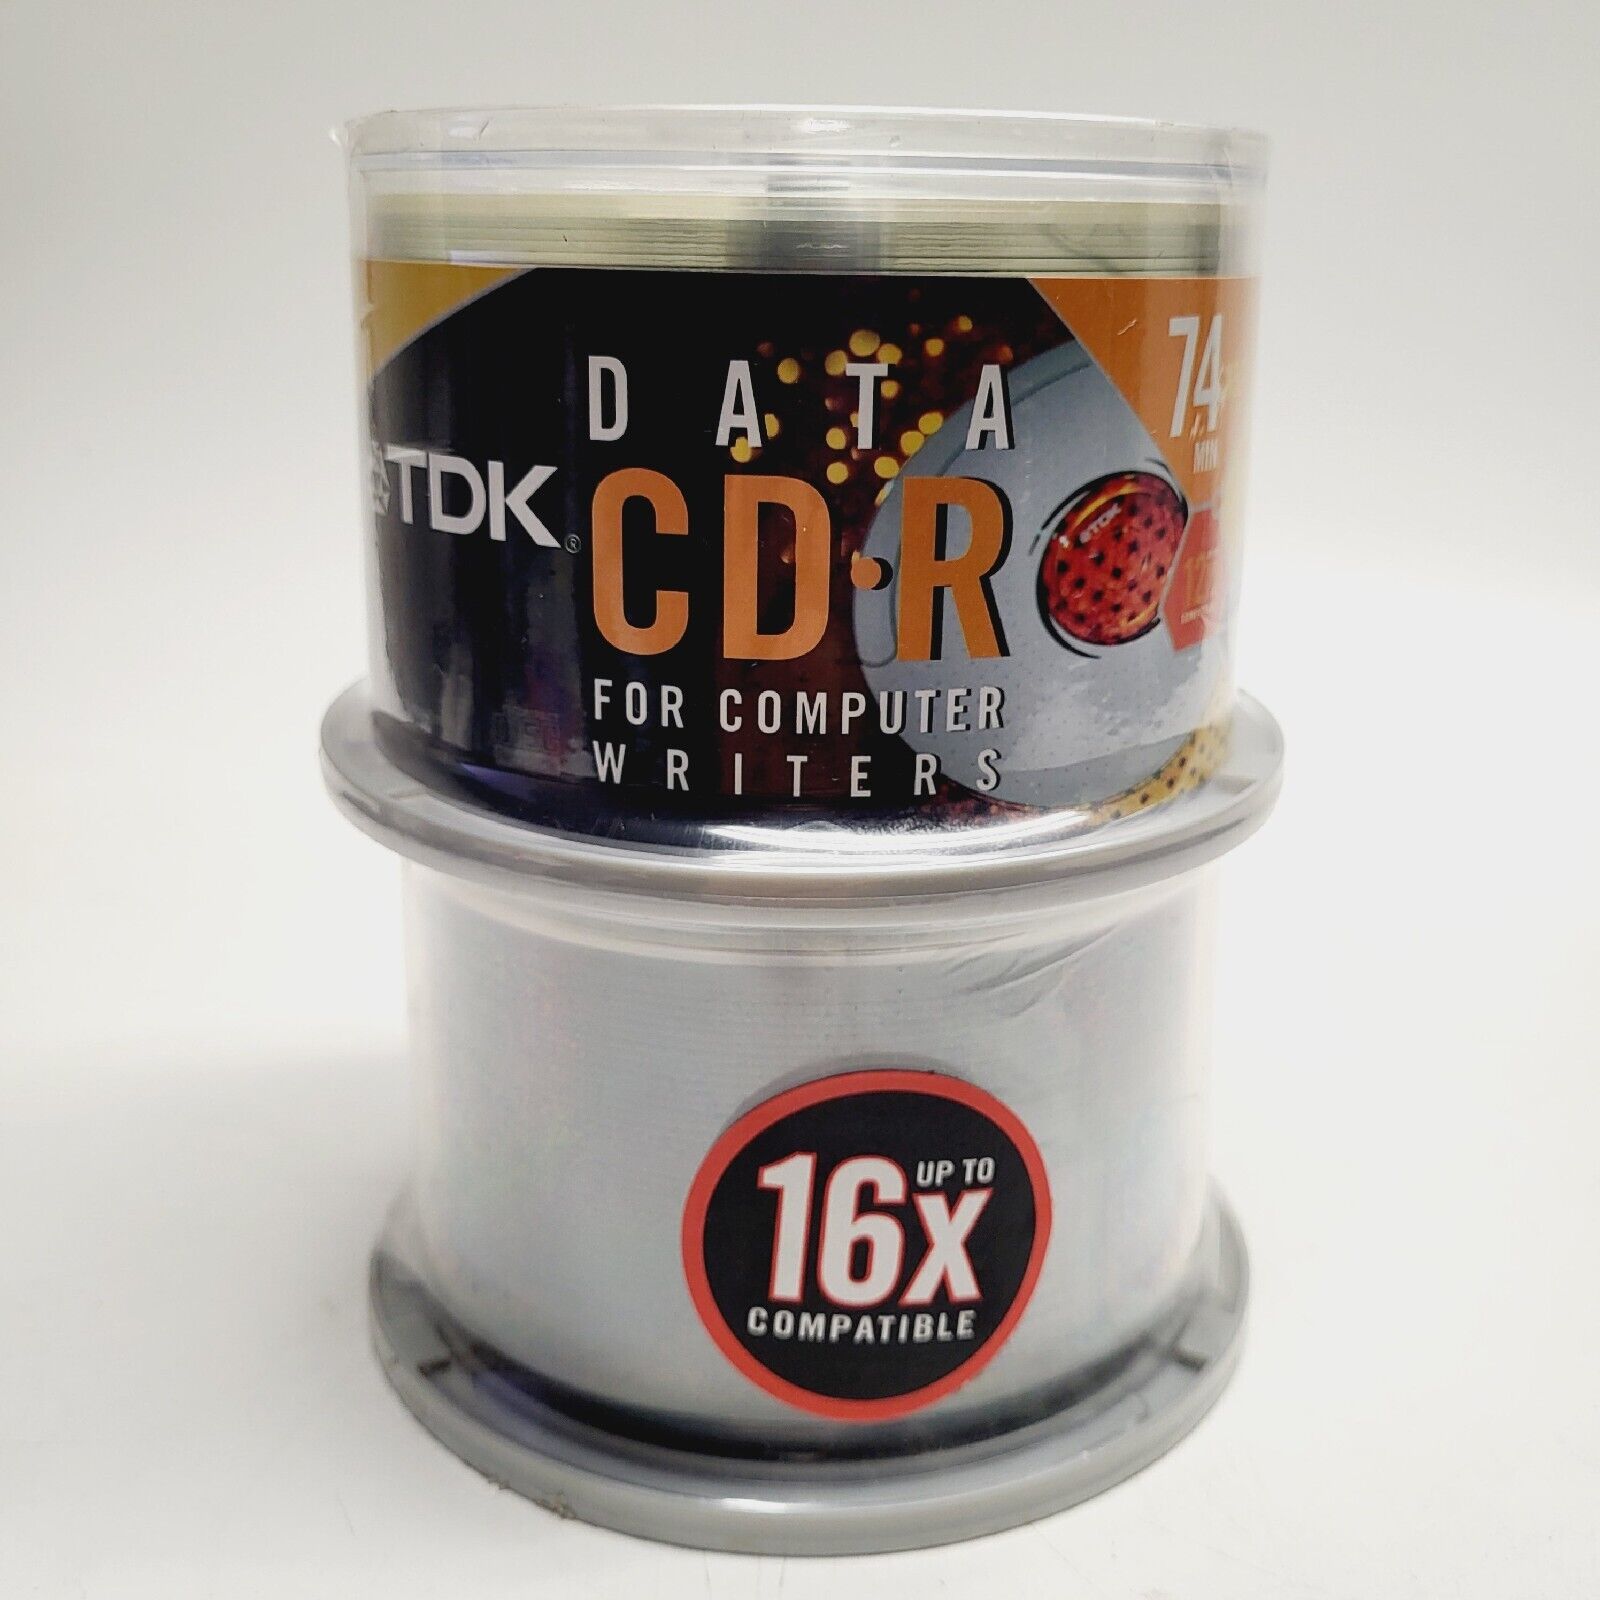 tdk-data-cd-r-for-computer-writers-74-min